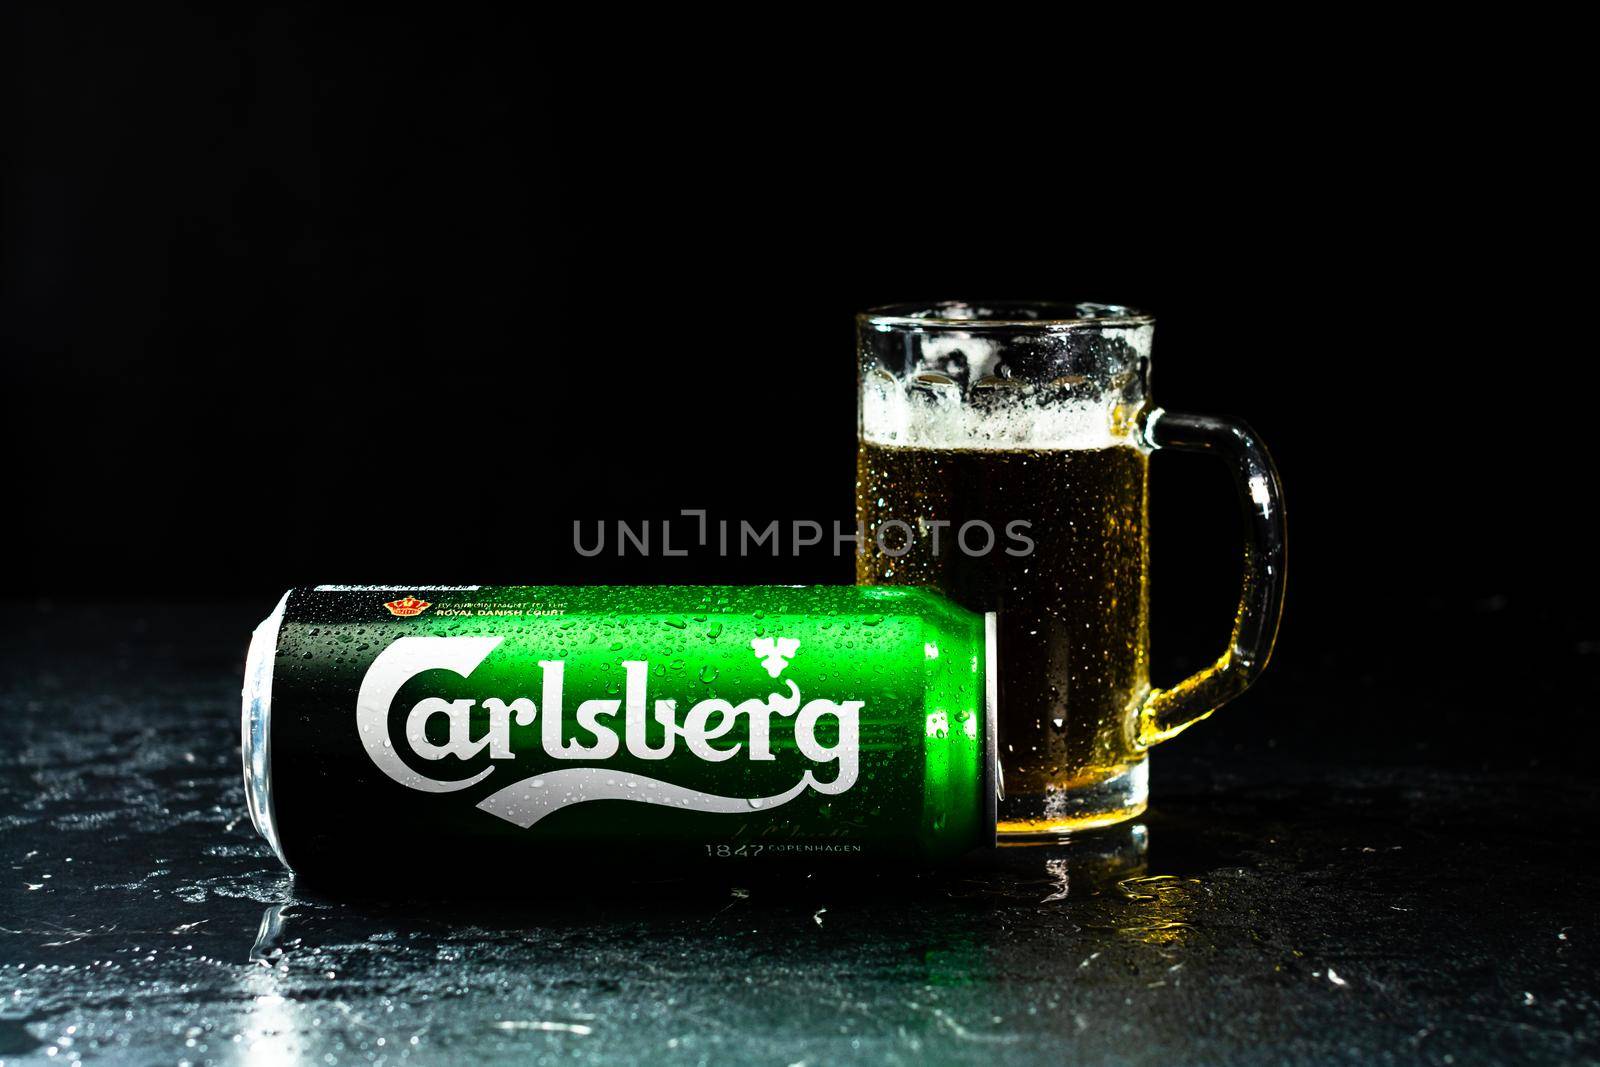 Can of Carlsberg beer and beer glass on dark background. Illustrative editorial photo shot in Bucharest, Romania, 2021